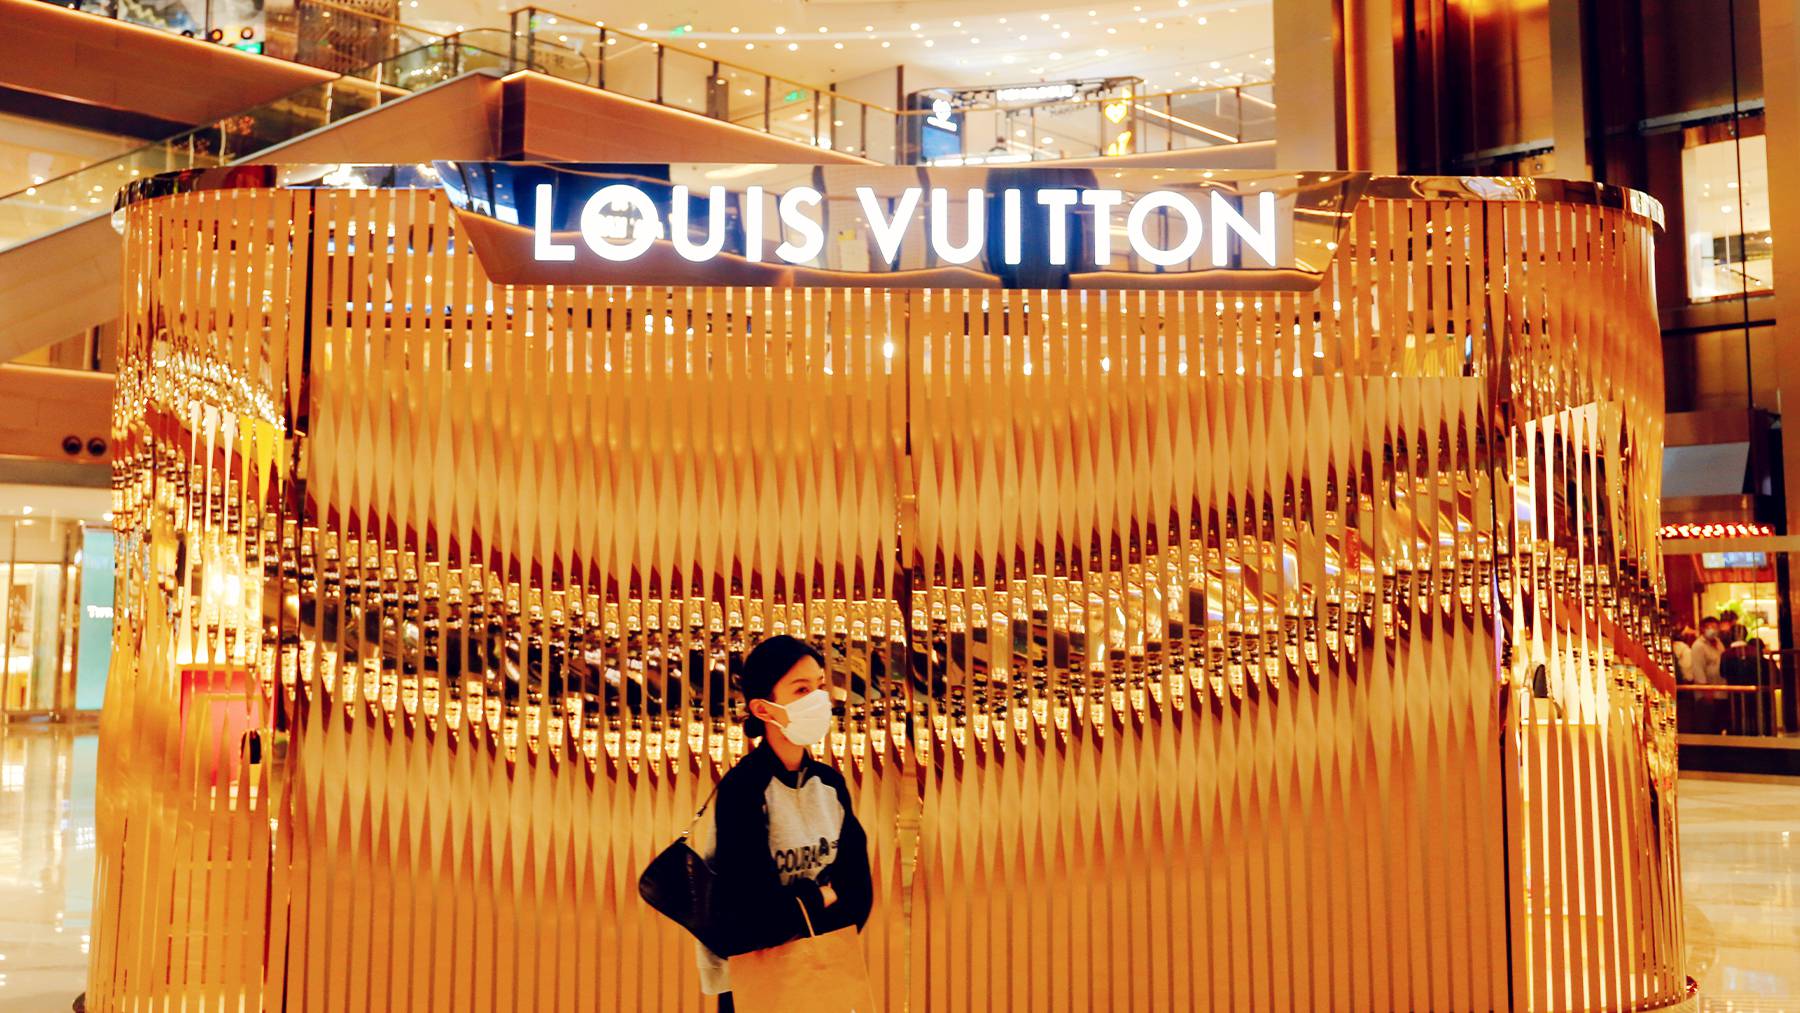 A Louis Vuitton pop-up store in Shanghai, China.